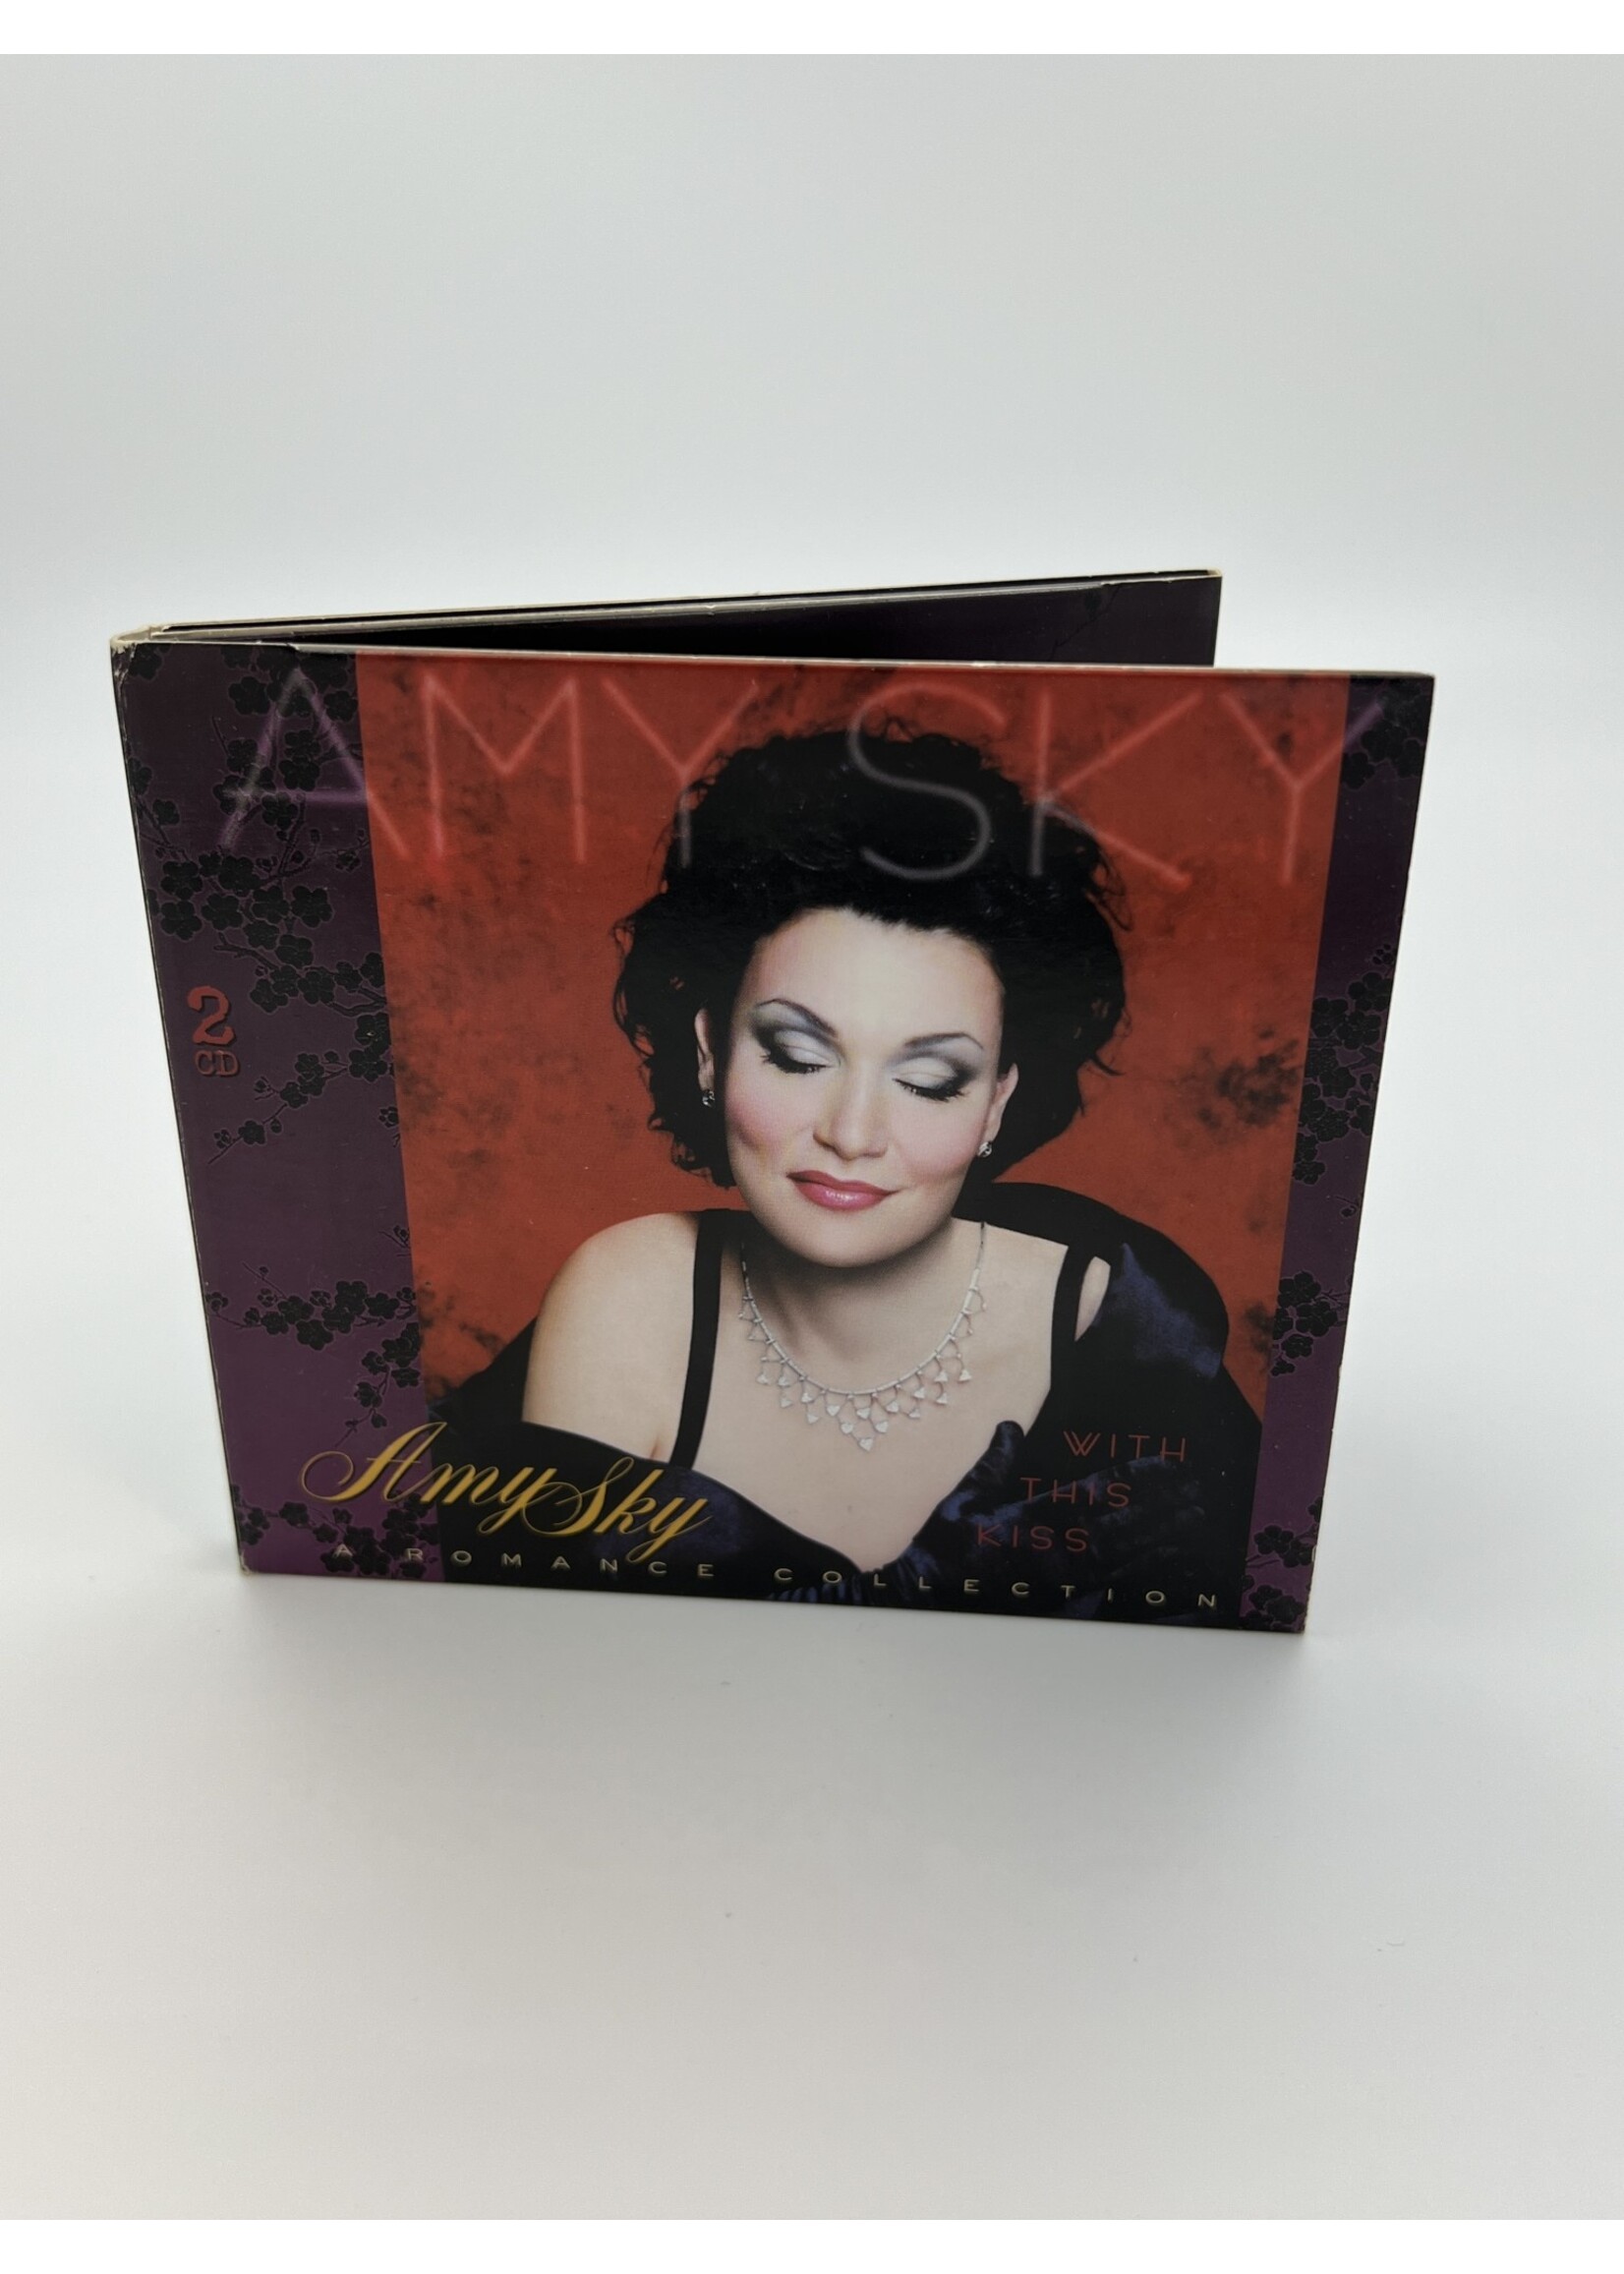 CD Amy Sky With This Kiss A Romance Collection 2 CD